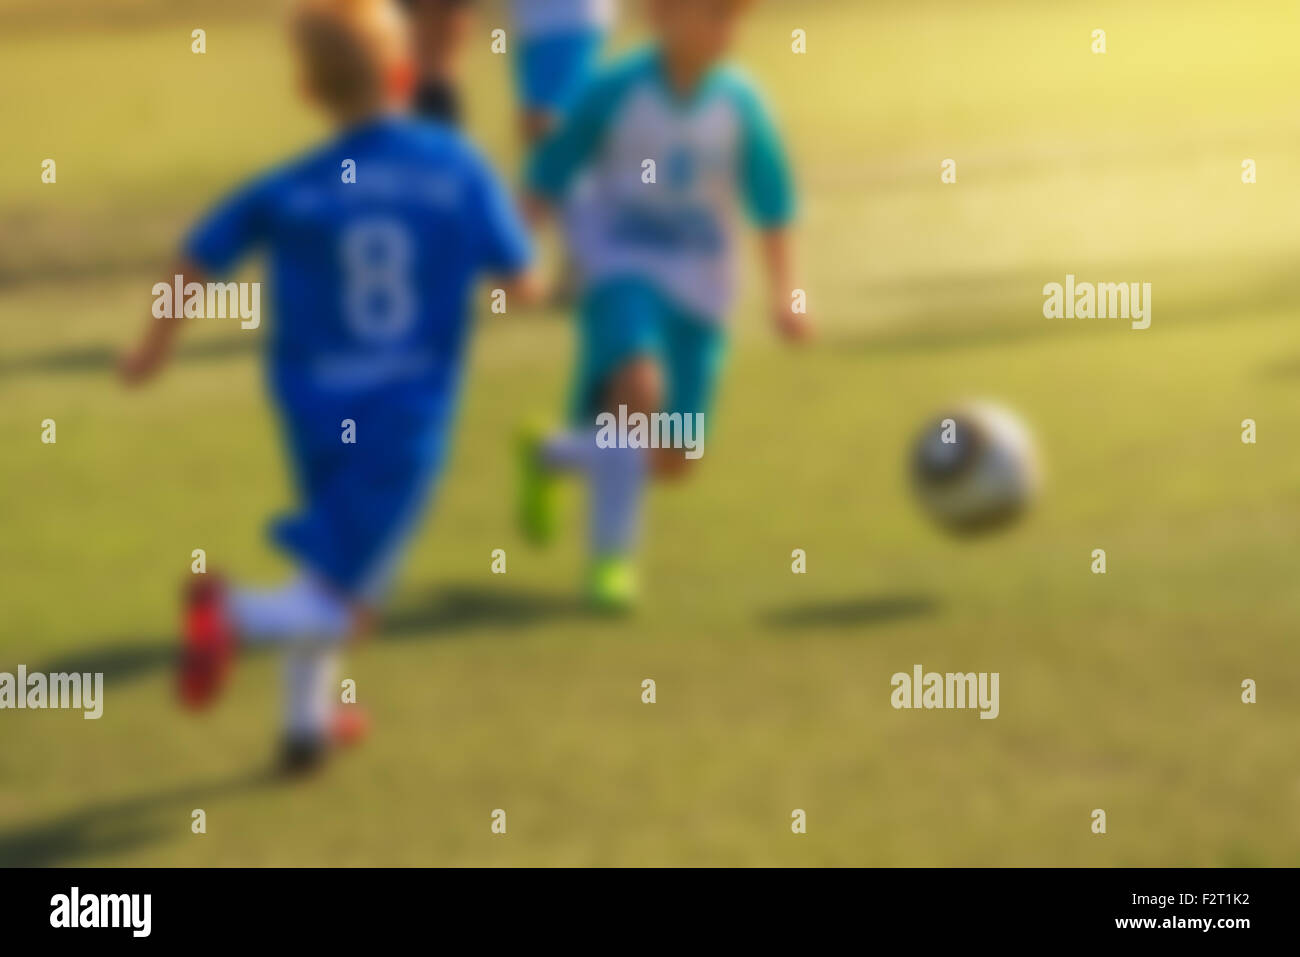 Kids playing soccer, defocussed blur sport background image Stock Photo